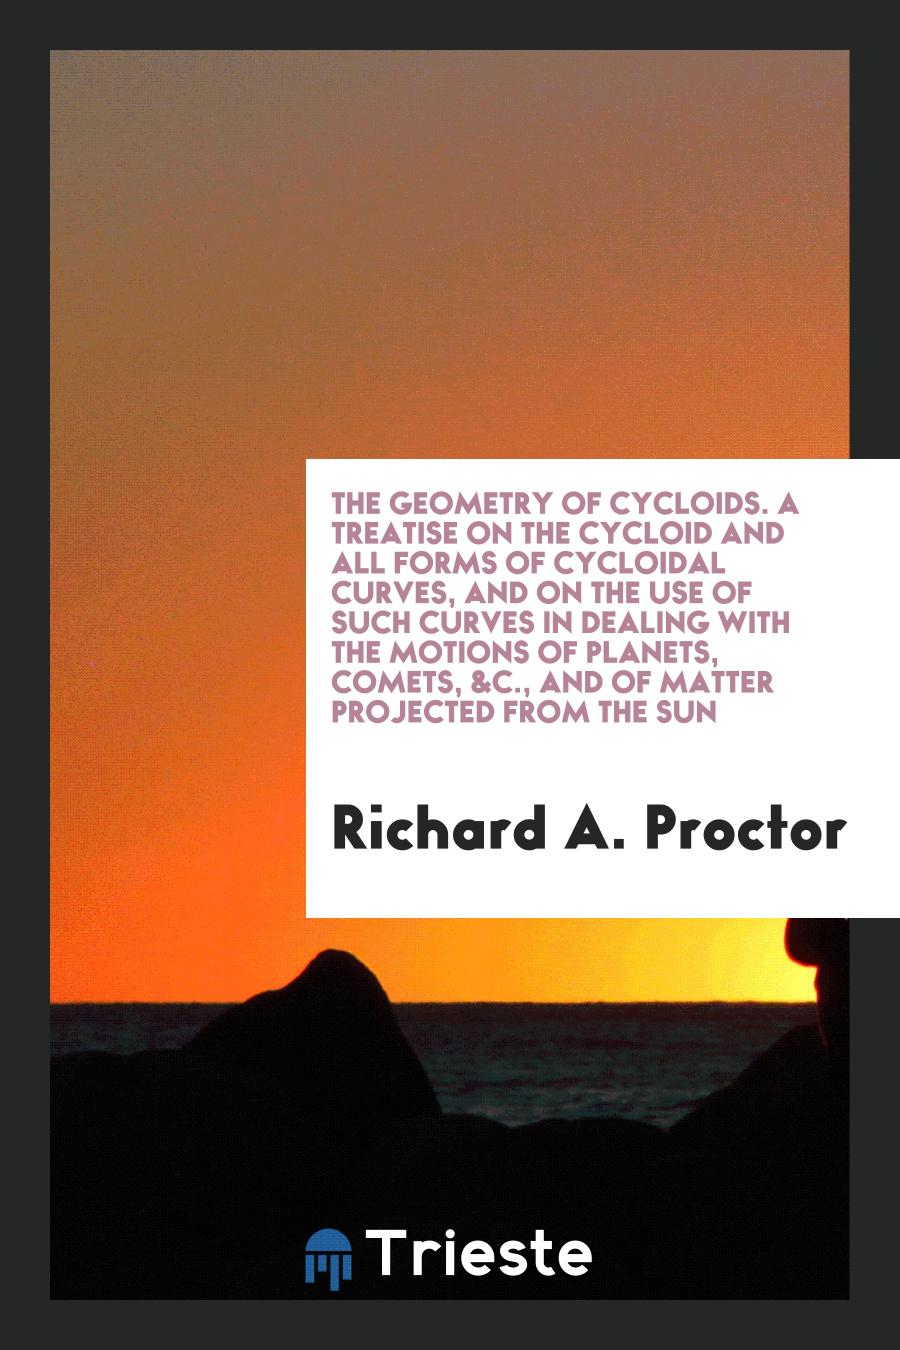 The Geometry of Cycloids. A Treatise on the Cycloid and All Forms of Cycloidal Curves, and on the Use of Such Curves in Dealing with the Motions of Planets, Comets, &c., and of Matter Projected from the Sun